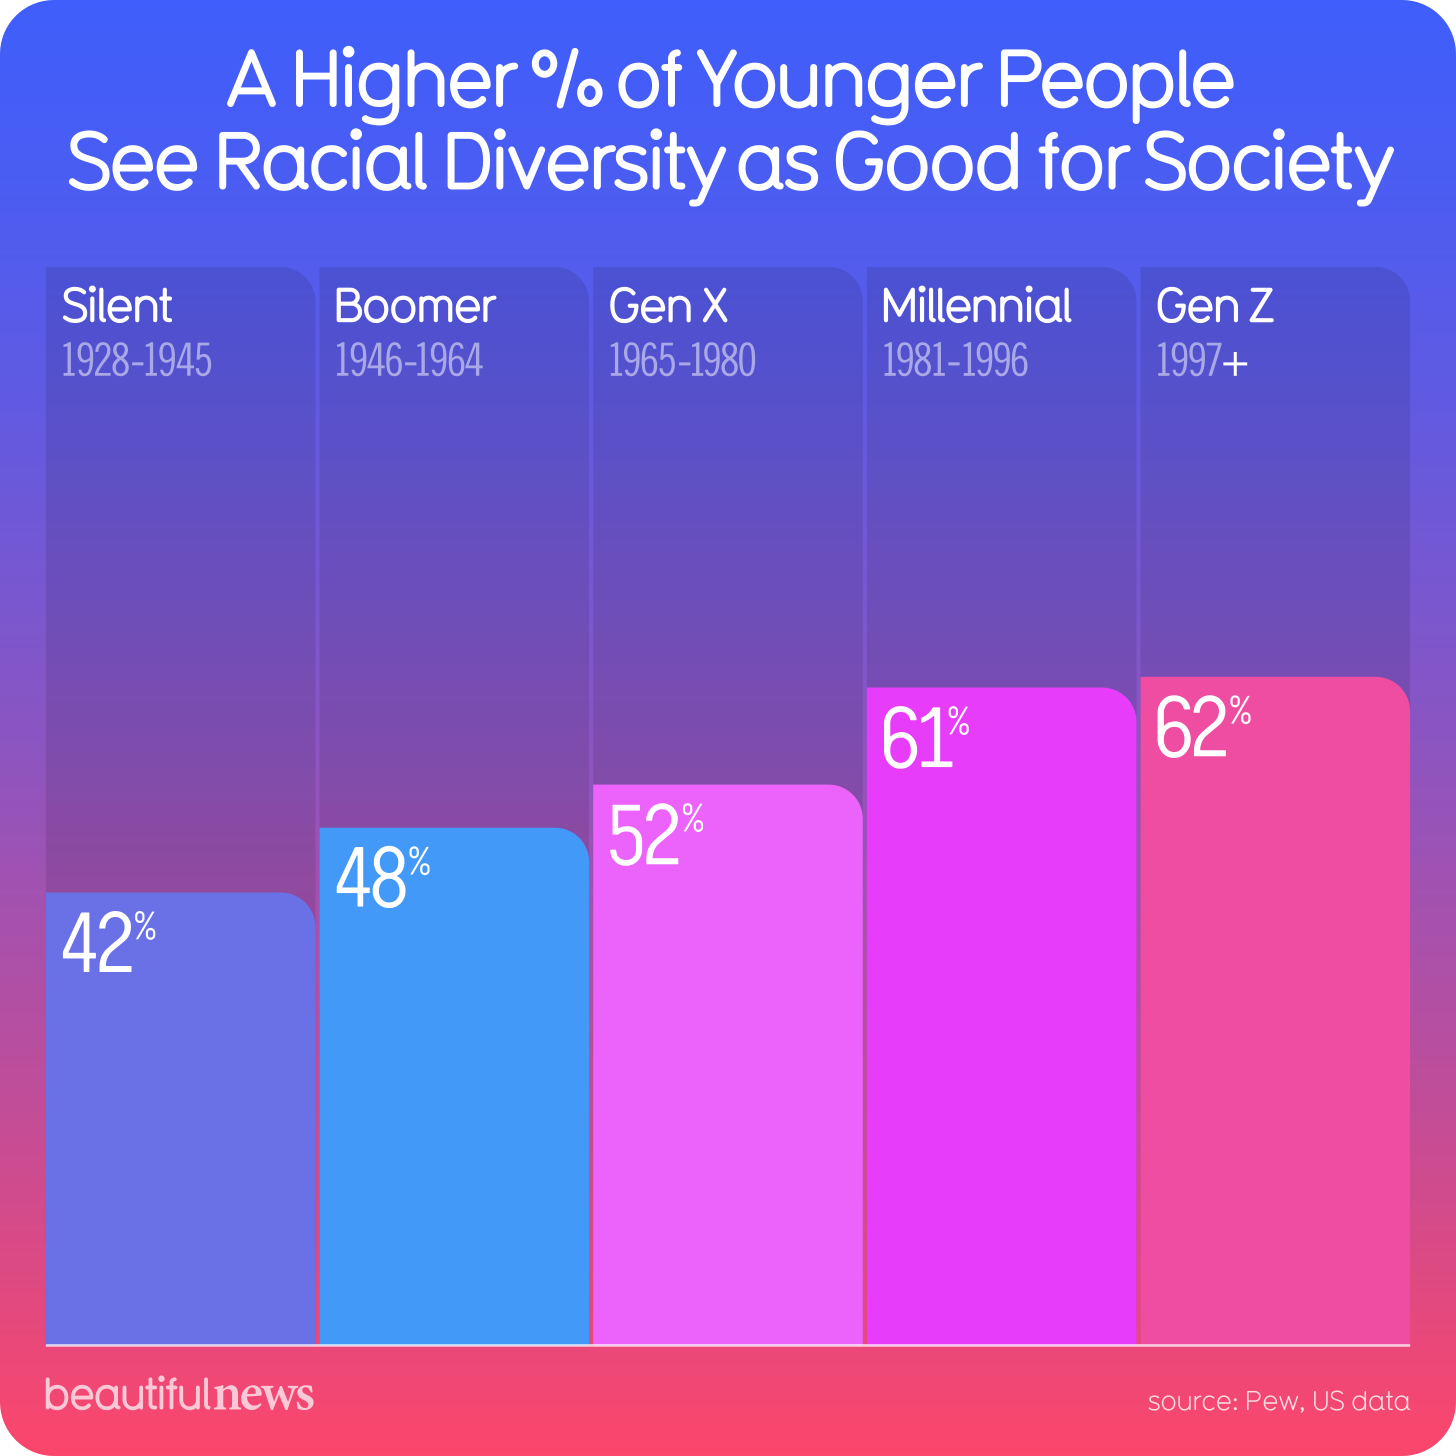 A Higher % of Younger People See Racial Diversity as Good for Society